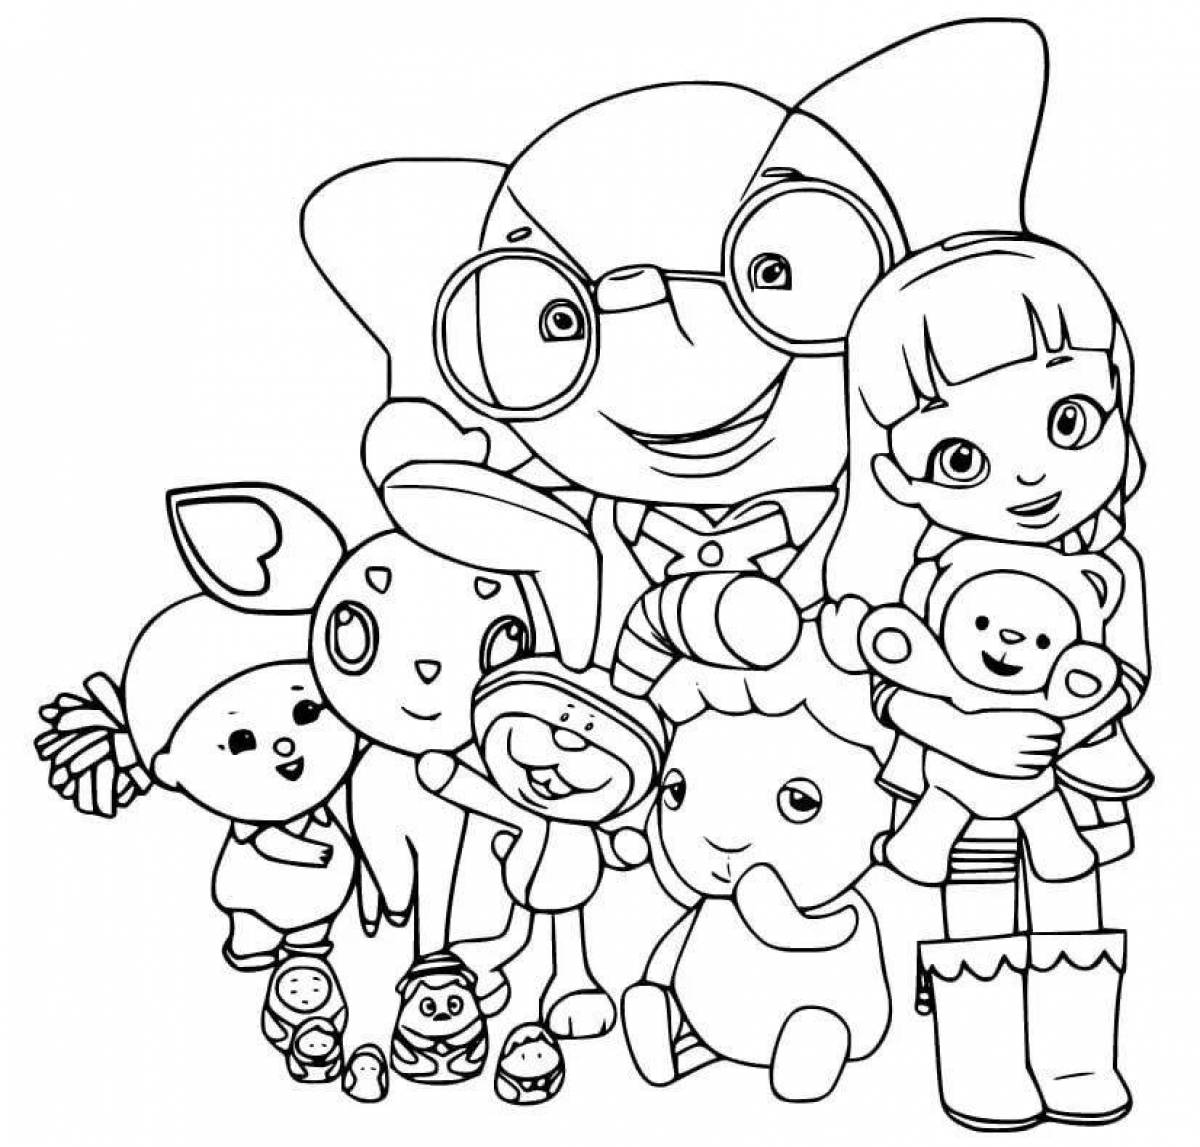 Coloring pages for girls rainbow friends